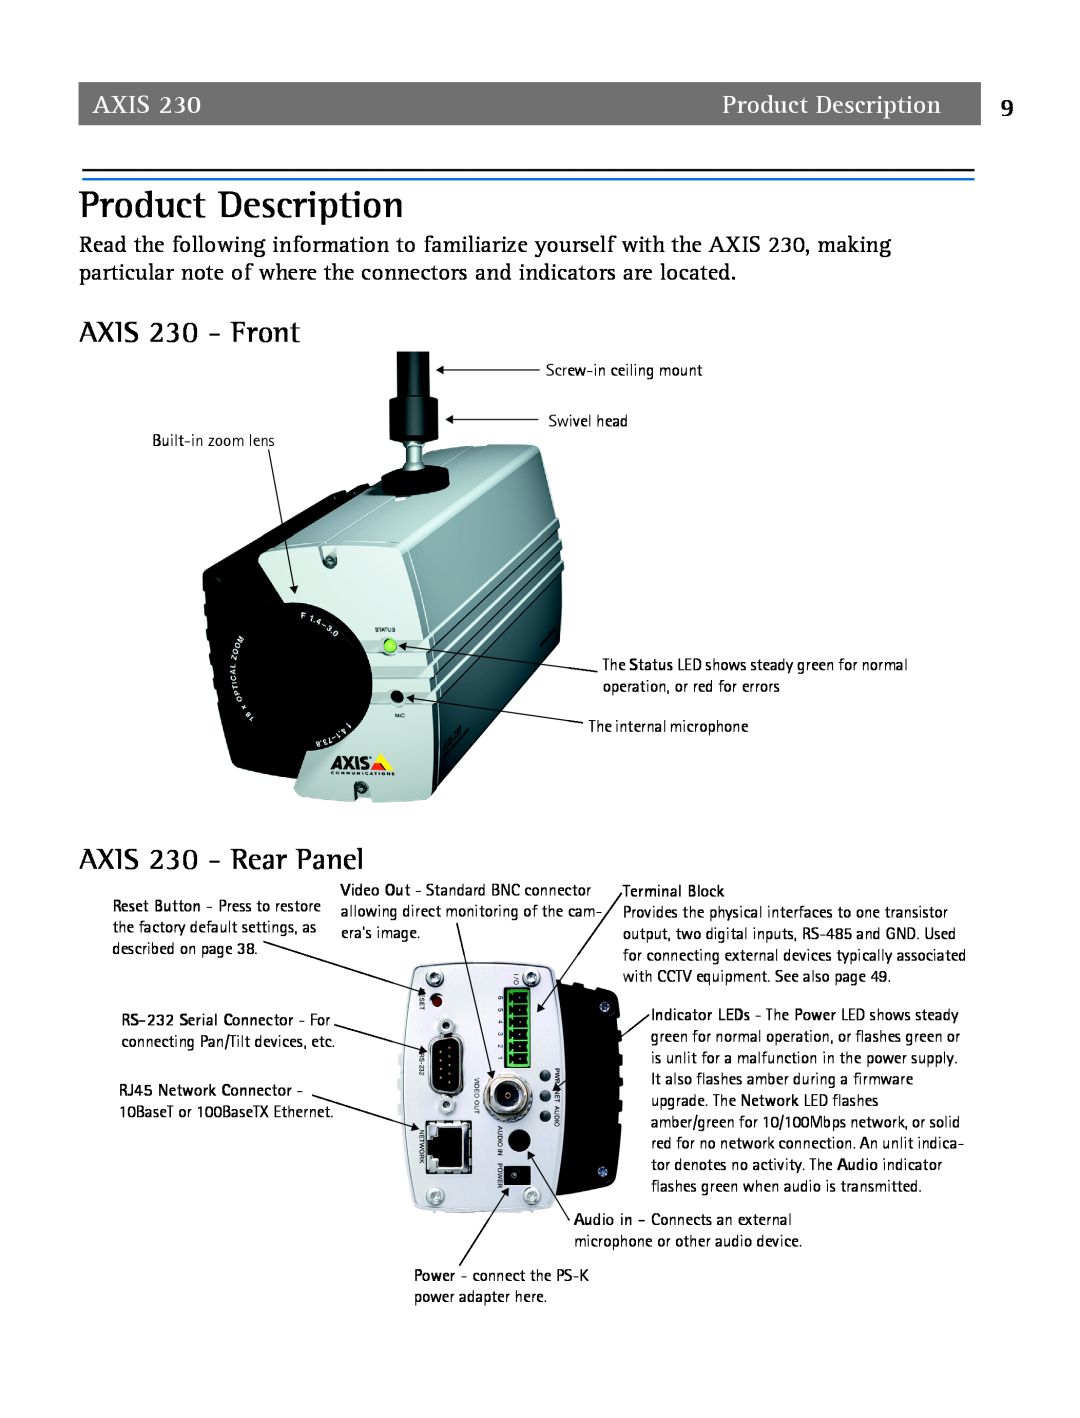 Axis Communications user manual Product Description, AXIS 230 - Front, AXIS 230 - Rear Panel, Axis 